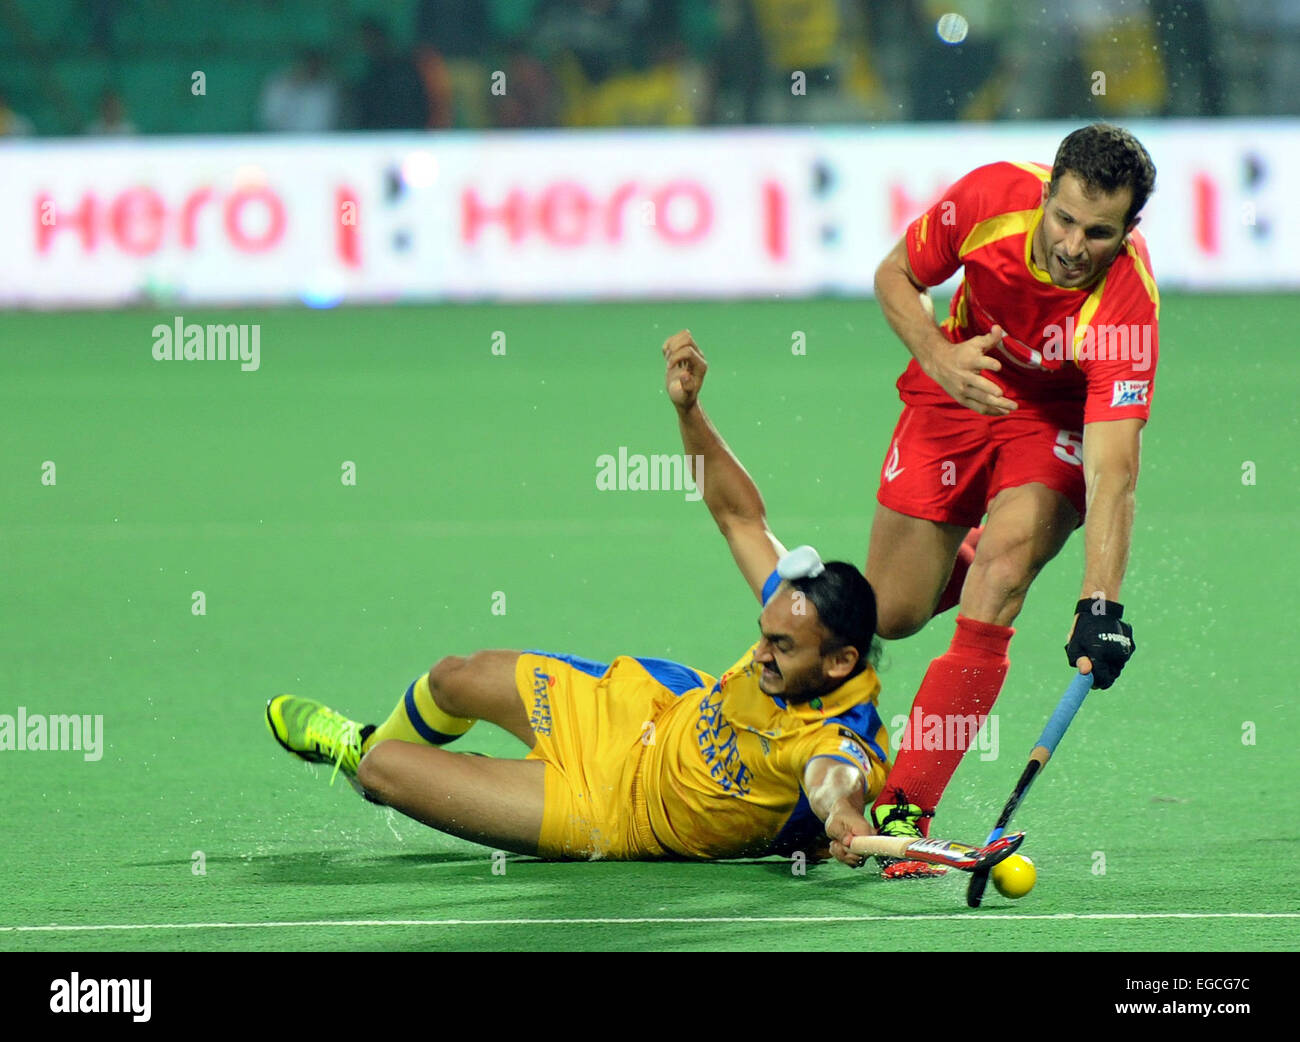 New Delhi, India. 22nd Feb, 2015. Austin Smith (R) of Ranchi Rays dribbles past G. Singh of Punjab Warriors during the final match of the Hockey India League 2015 at the Major Dhyan Chand National Stadium in New Delhi, India, Feb. 22, 2015. Ranchi Rays defeated Punjab Warriors in the tie-breaker to clinch the title. © Partha Sarkar/Xinhua/Alamy Live News Stock Photo